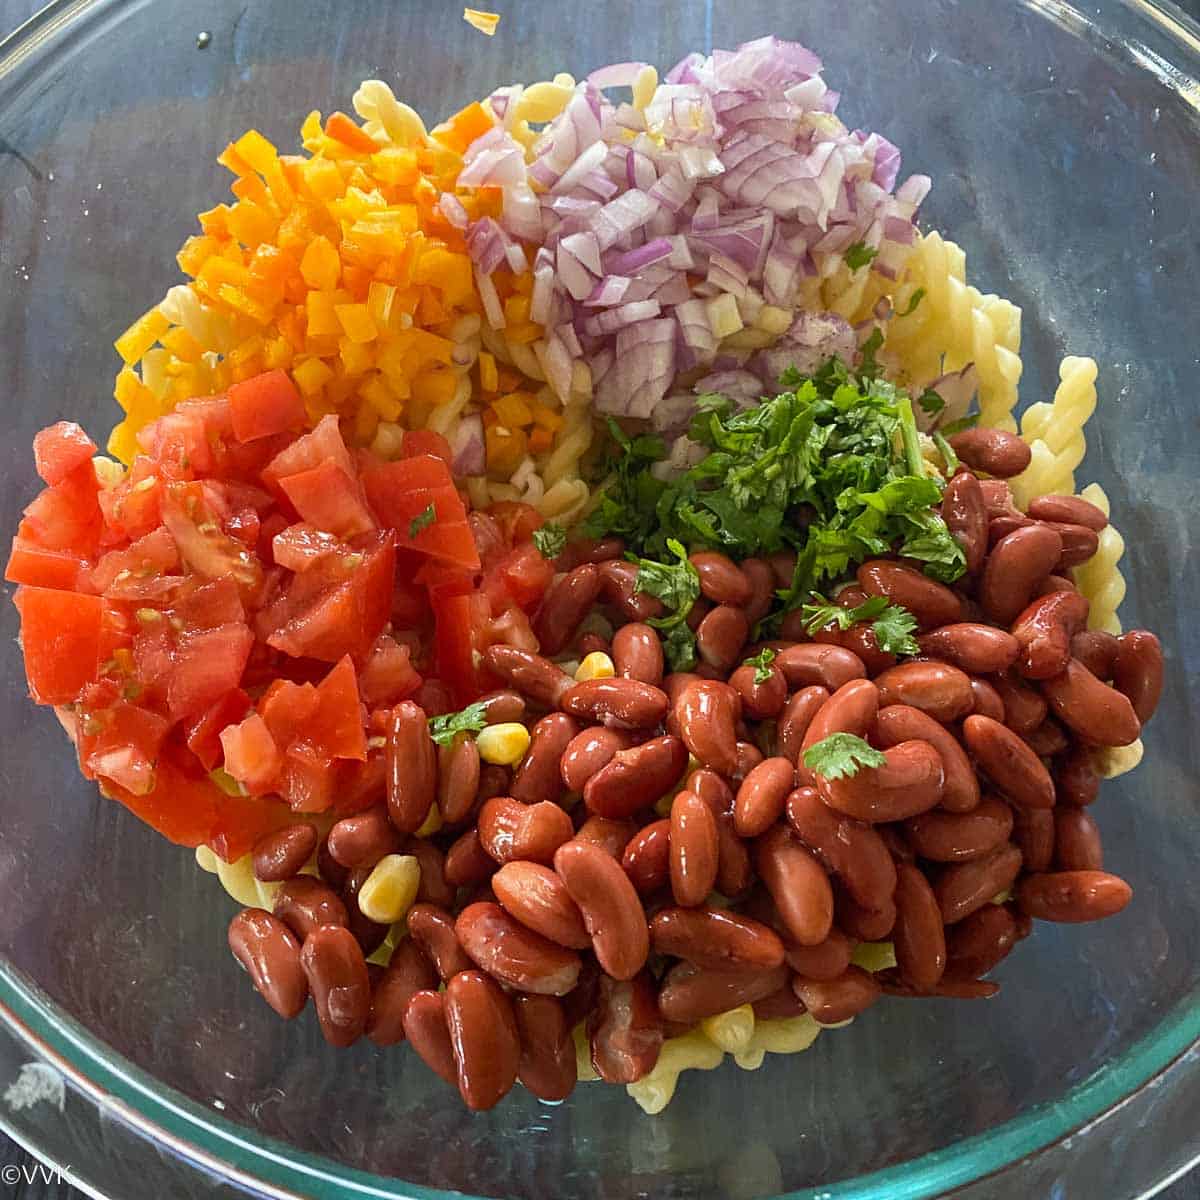 adding ingredients for the salad in a bowl